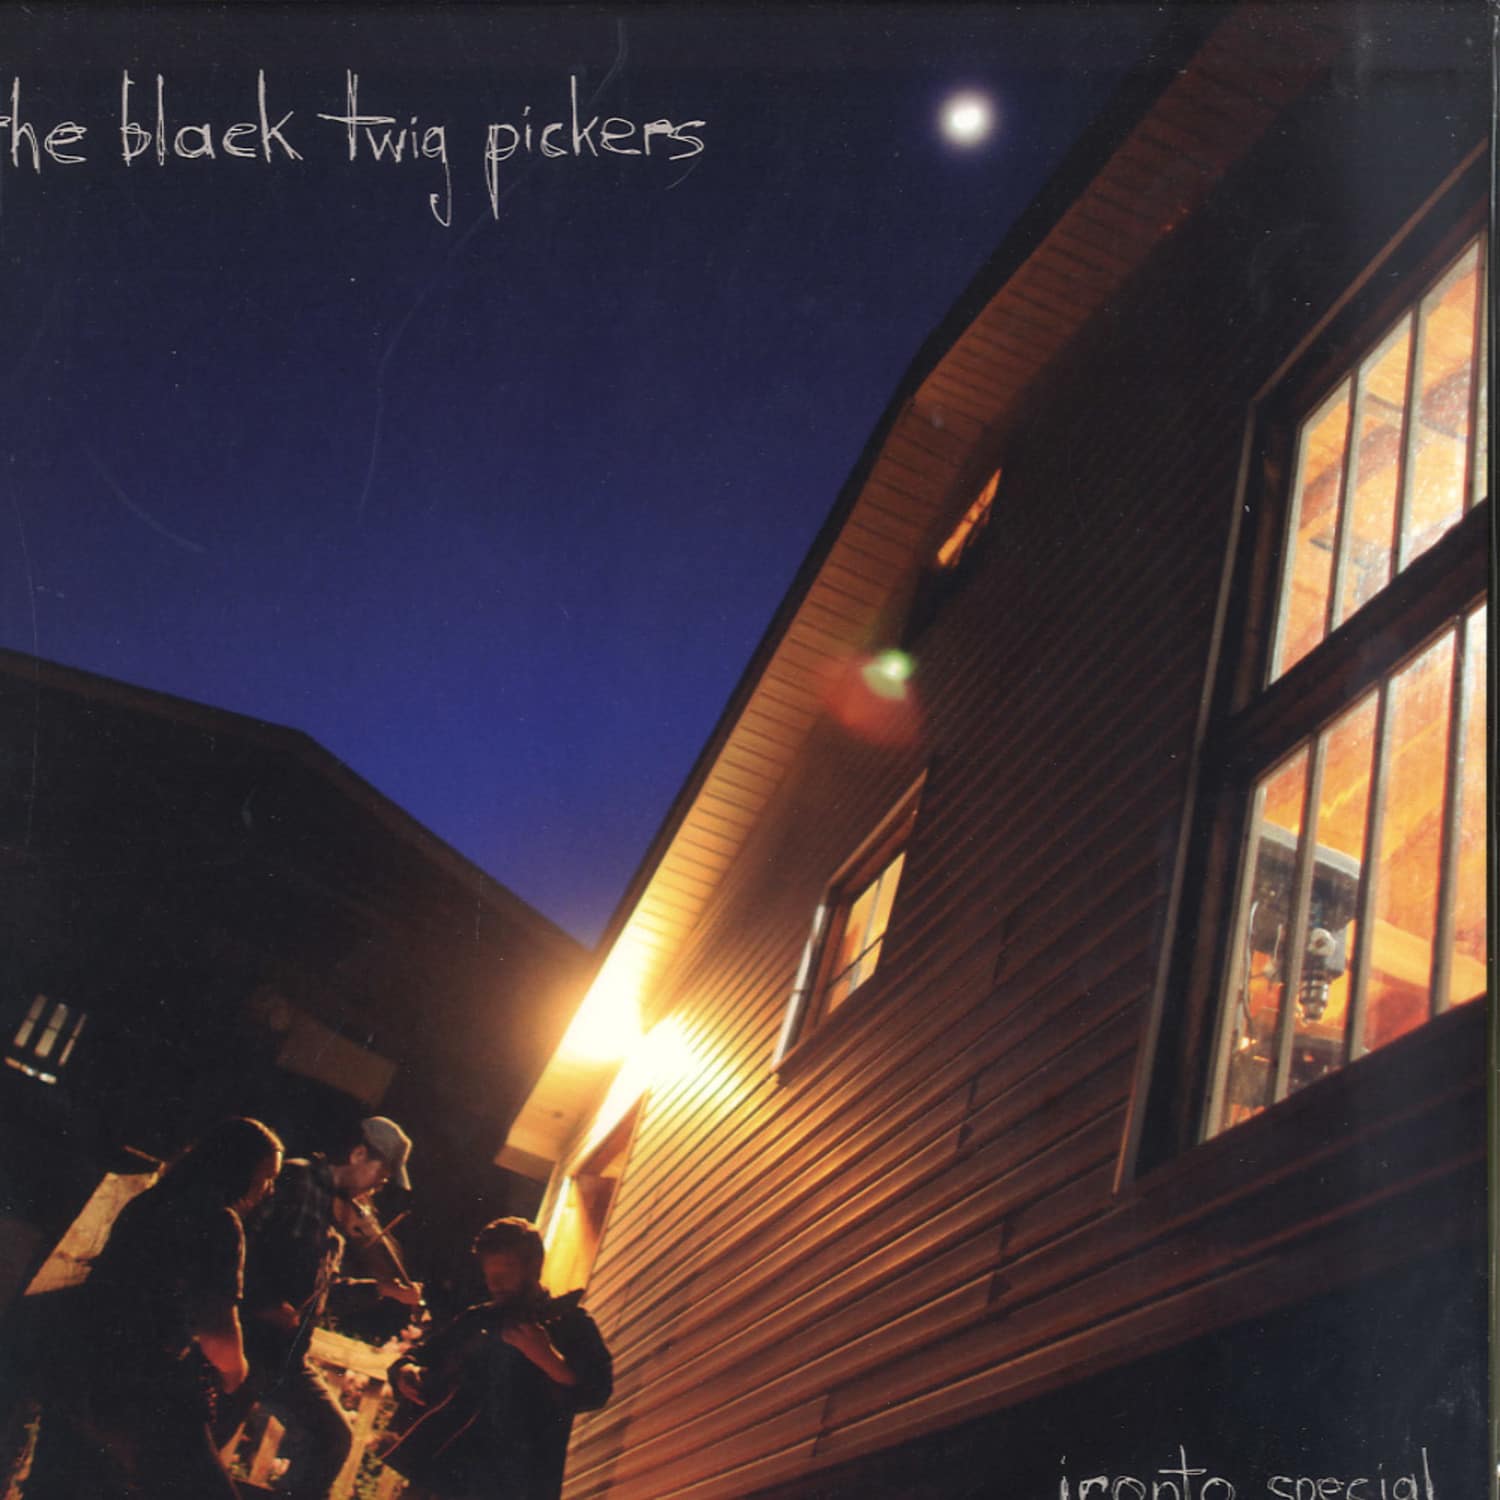 The Black Twig Pickers - IRONTO SPECIAL 